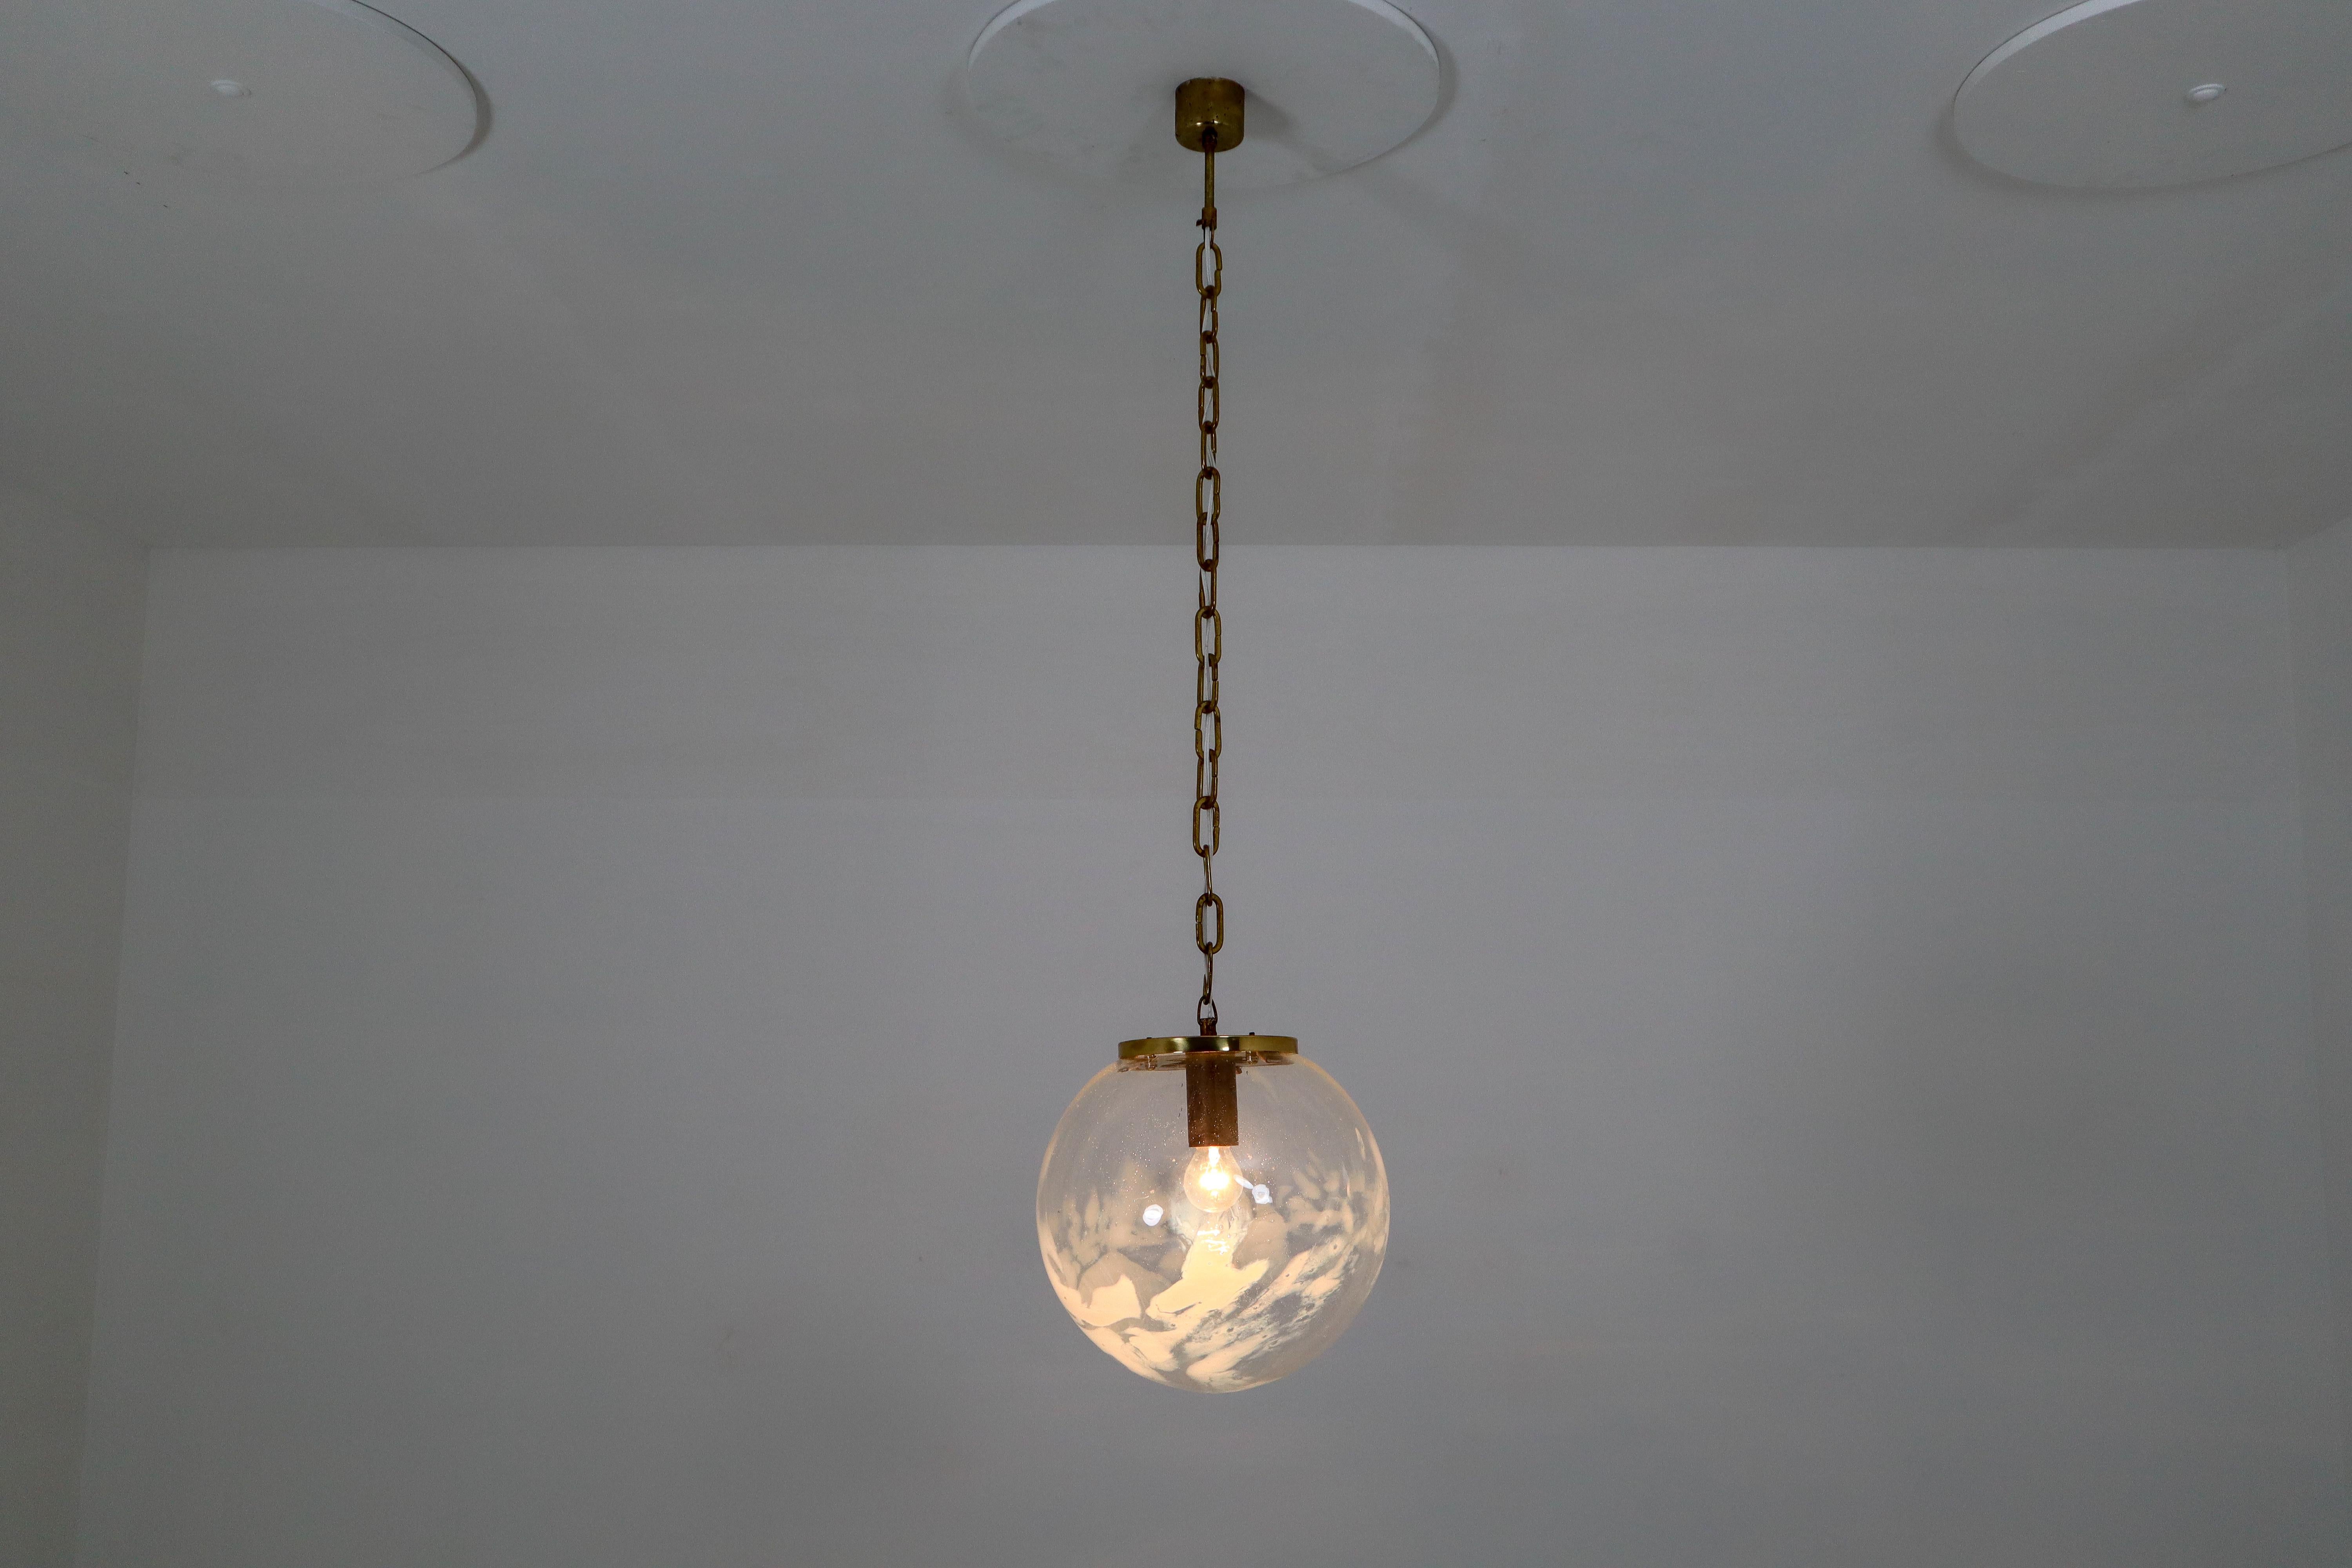 20th Century Midcentury Pendants in Brass and Art-Glass with White Streaks, European, 1970s